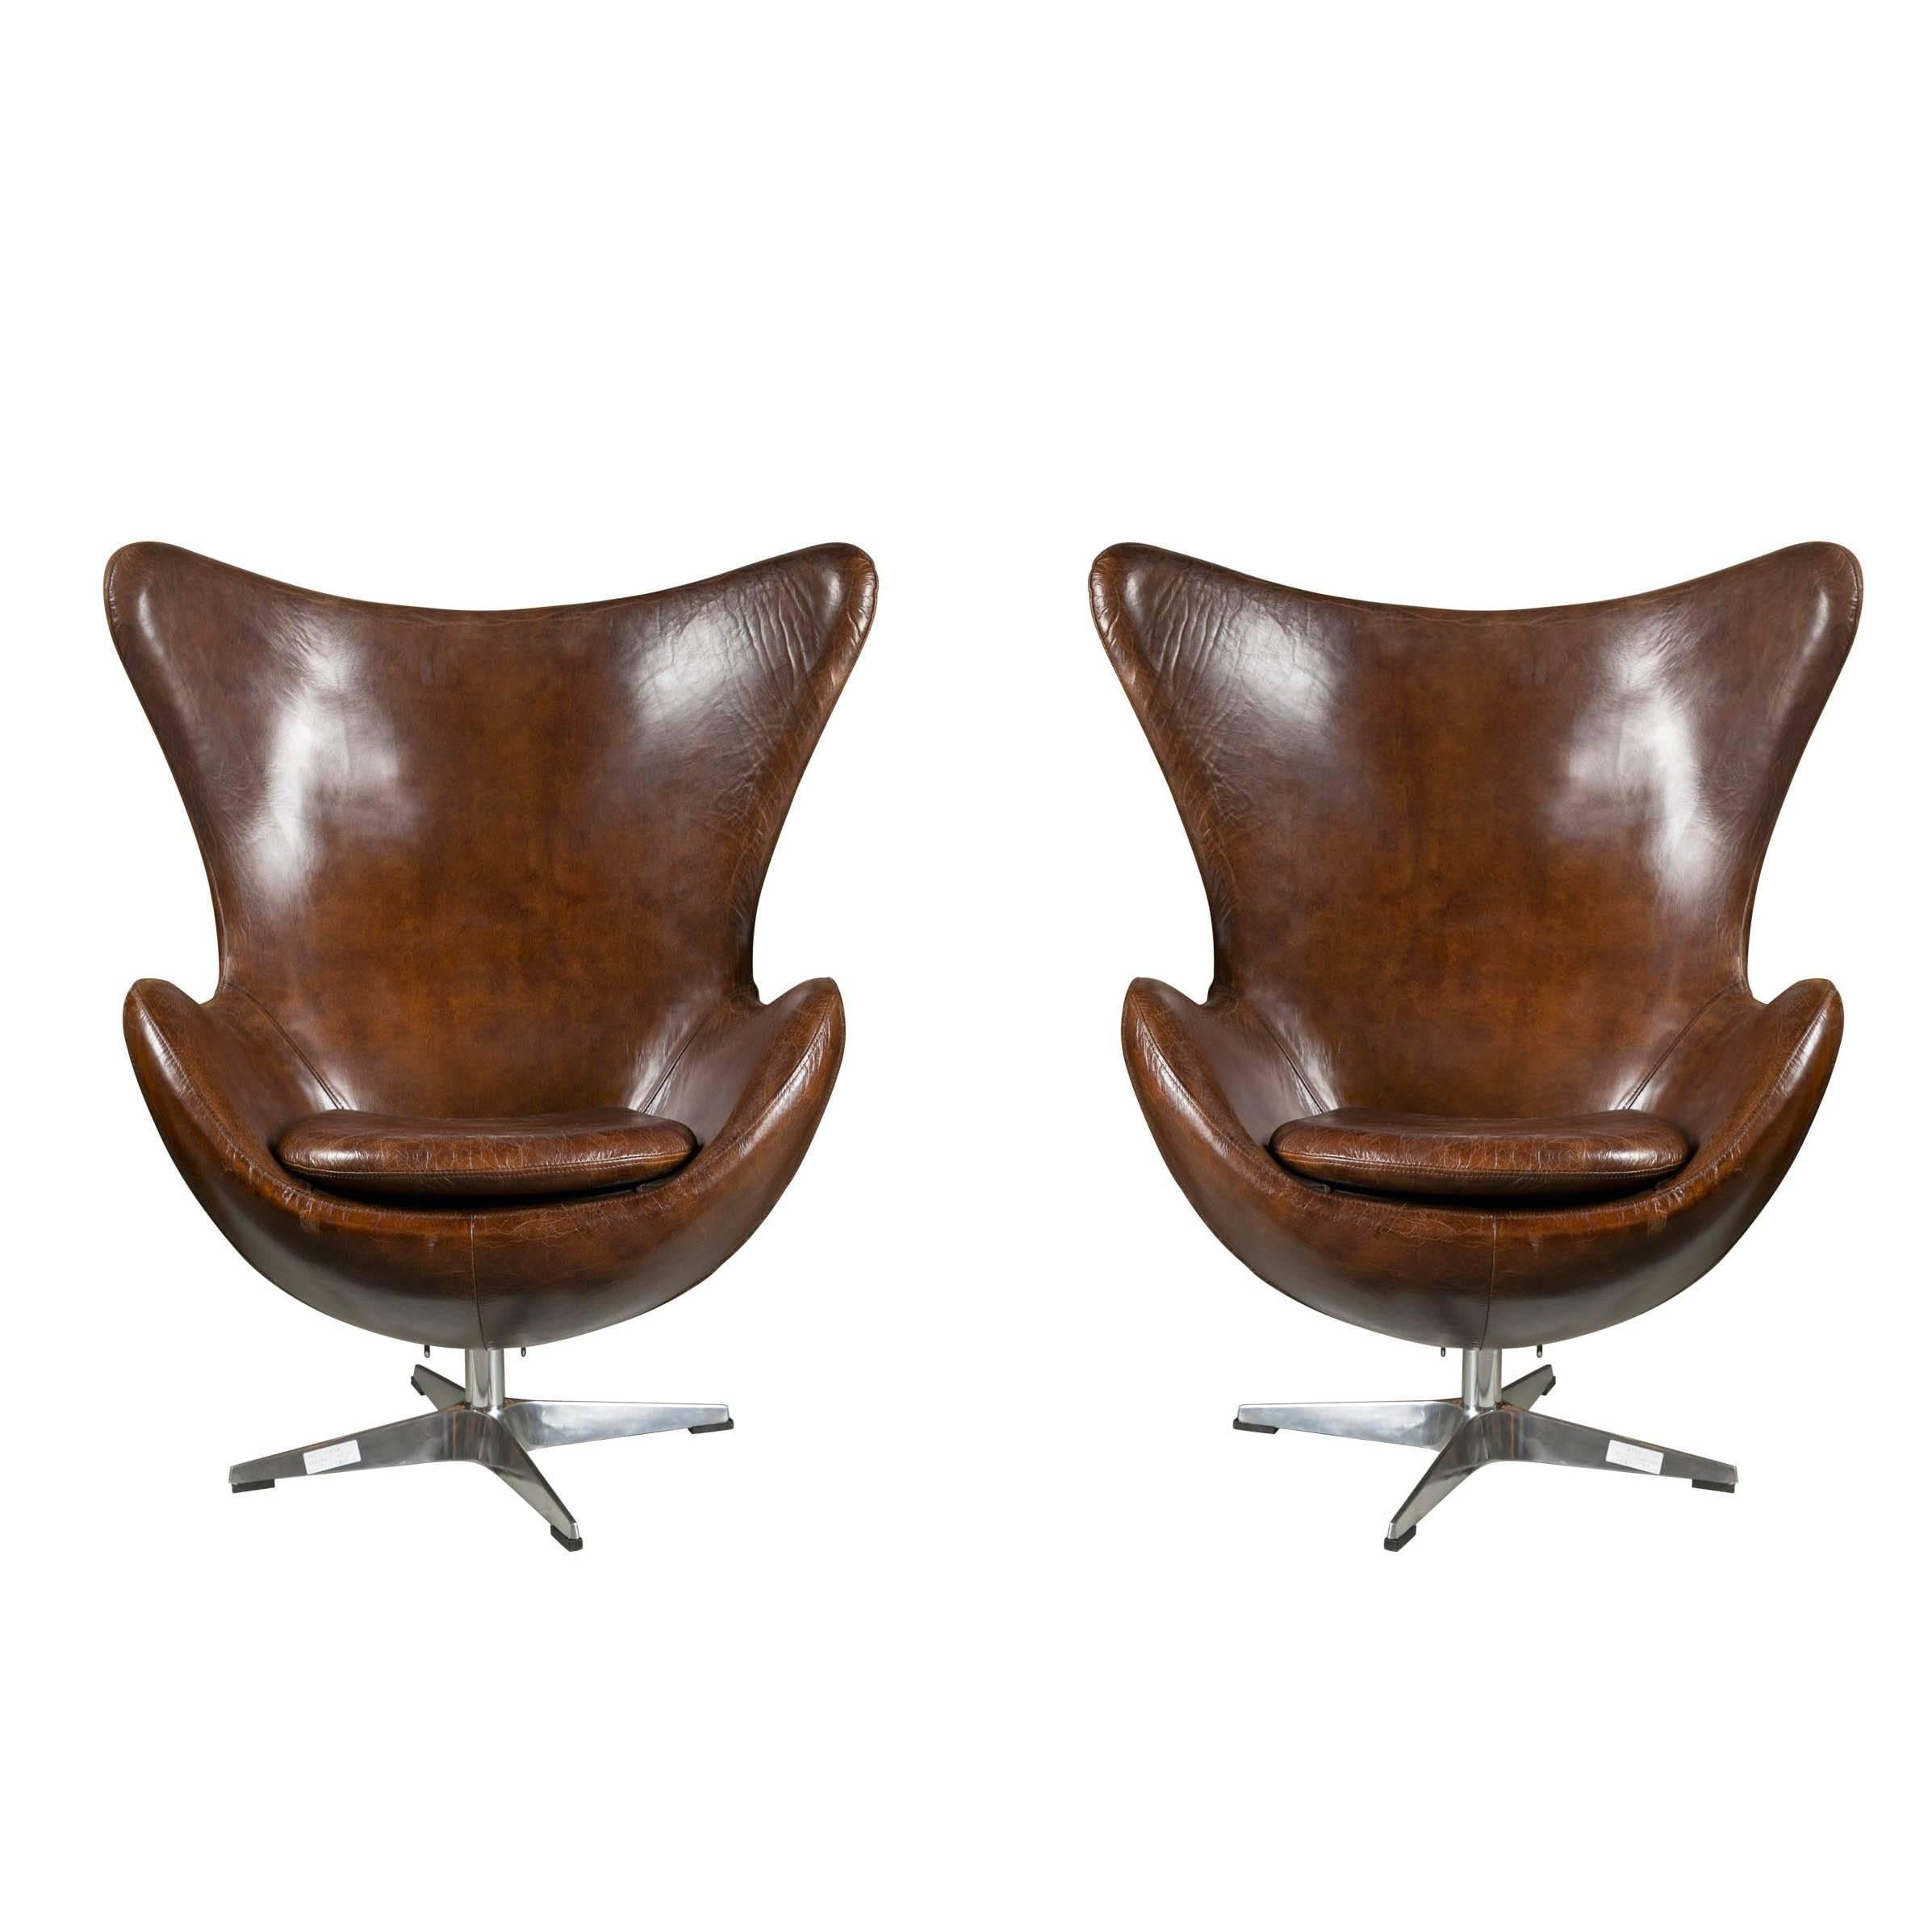 One Pair of Arne Jacobsen Style Egg Chairs